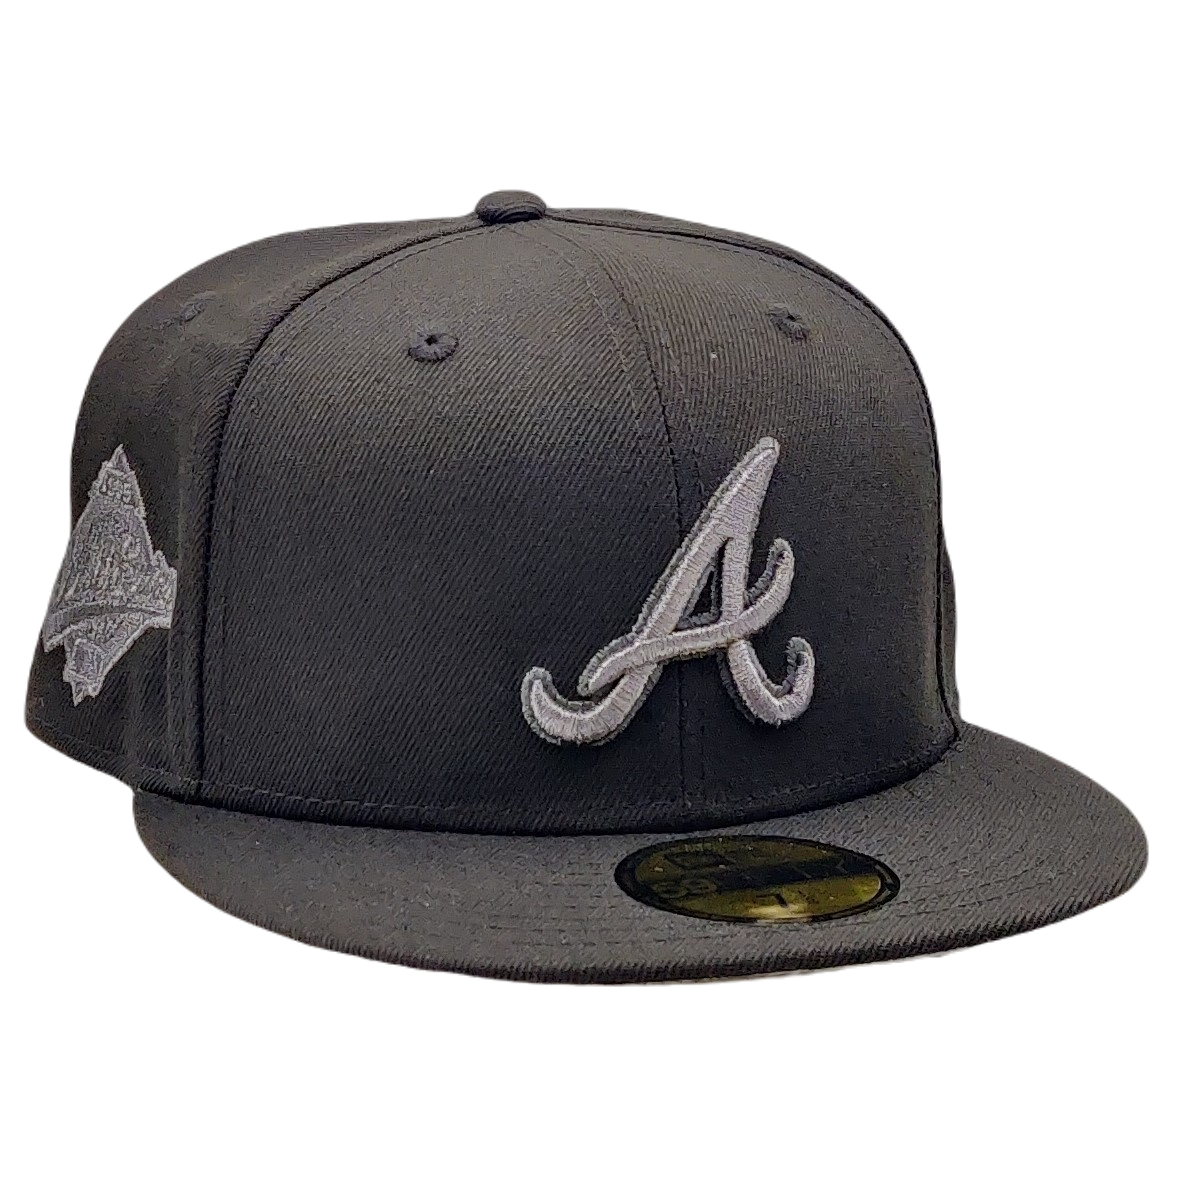 New Era 59Fifty Atlanta Braves 1995 World Series Patch Fitted Hat –  402Fitted